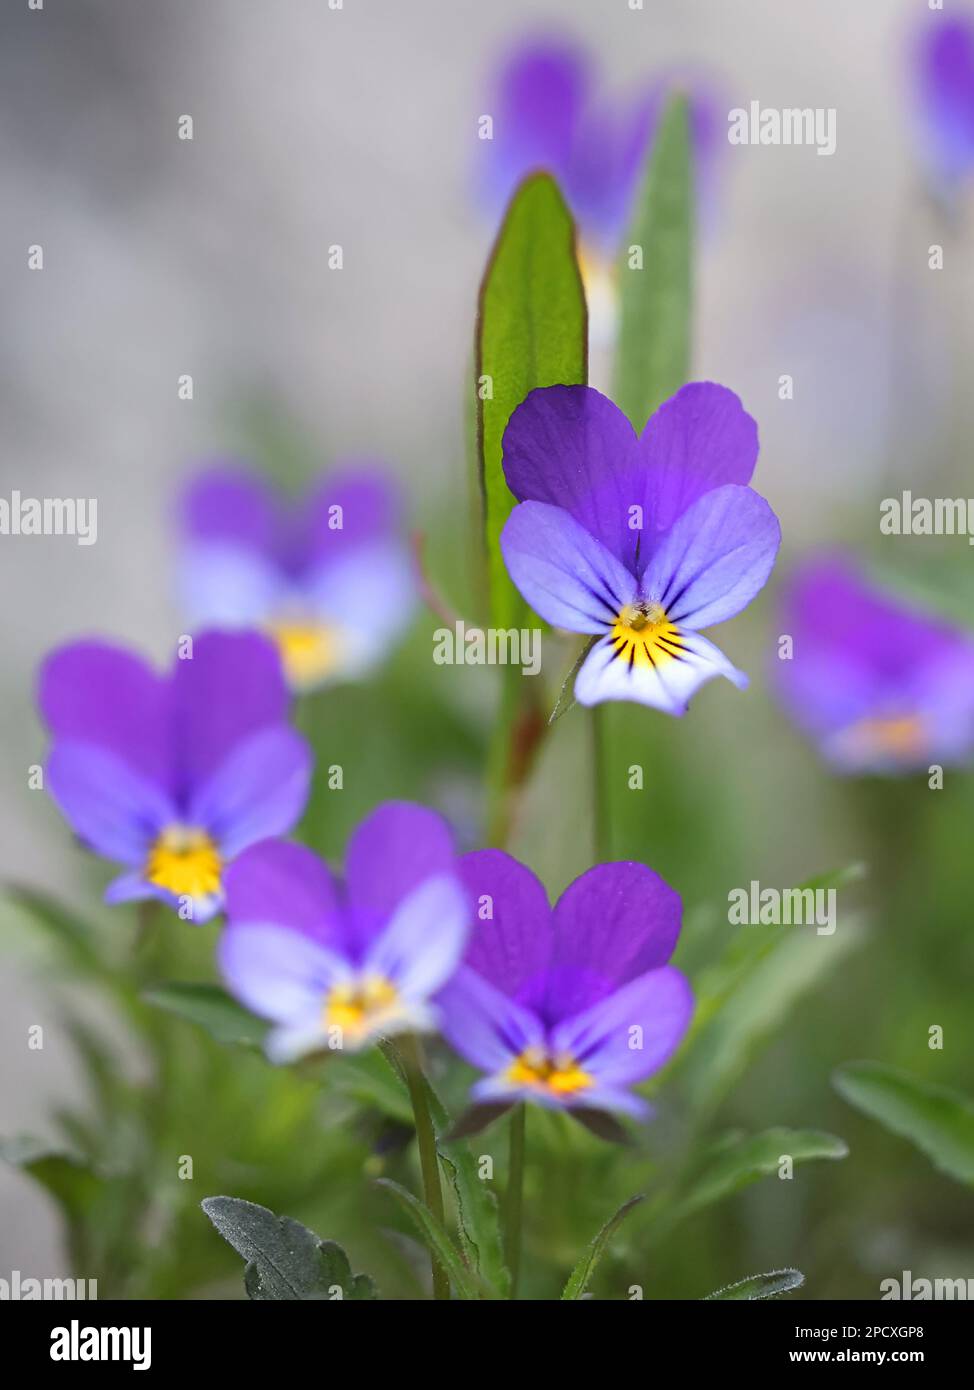 Viola tricolor, commonly knoen as wild pansy, Johnny Jump up, heartsease, heart's delight or tickle-my-fancy, wild flower from Finland Stock Photo